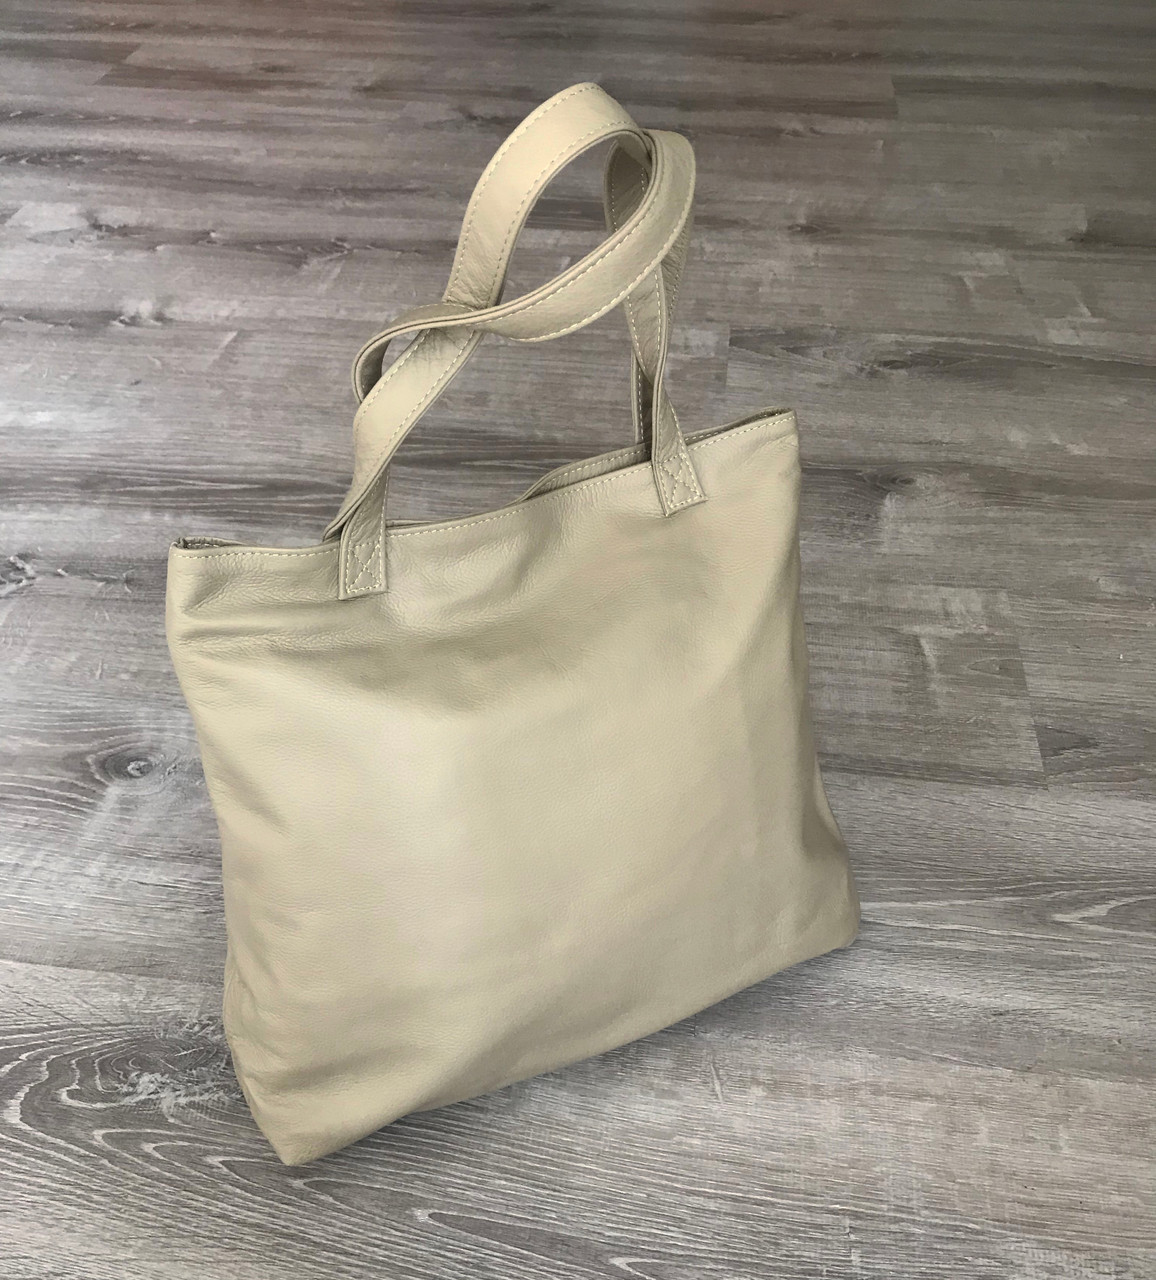 Blank Shoulder Tote Bags | Enviro-Tote - Made in USA